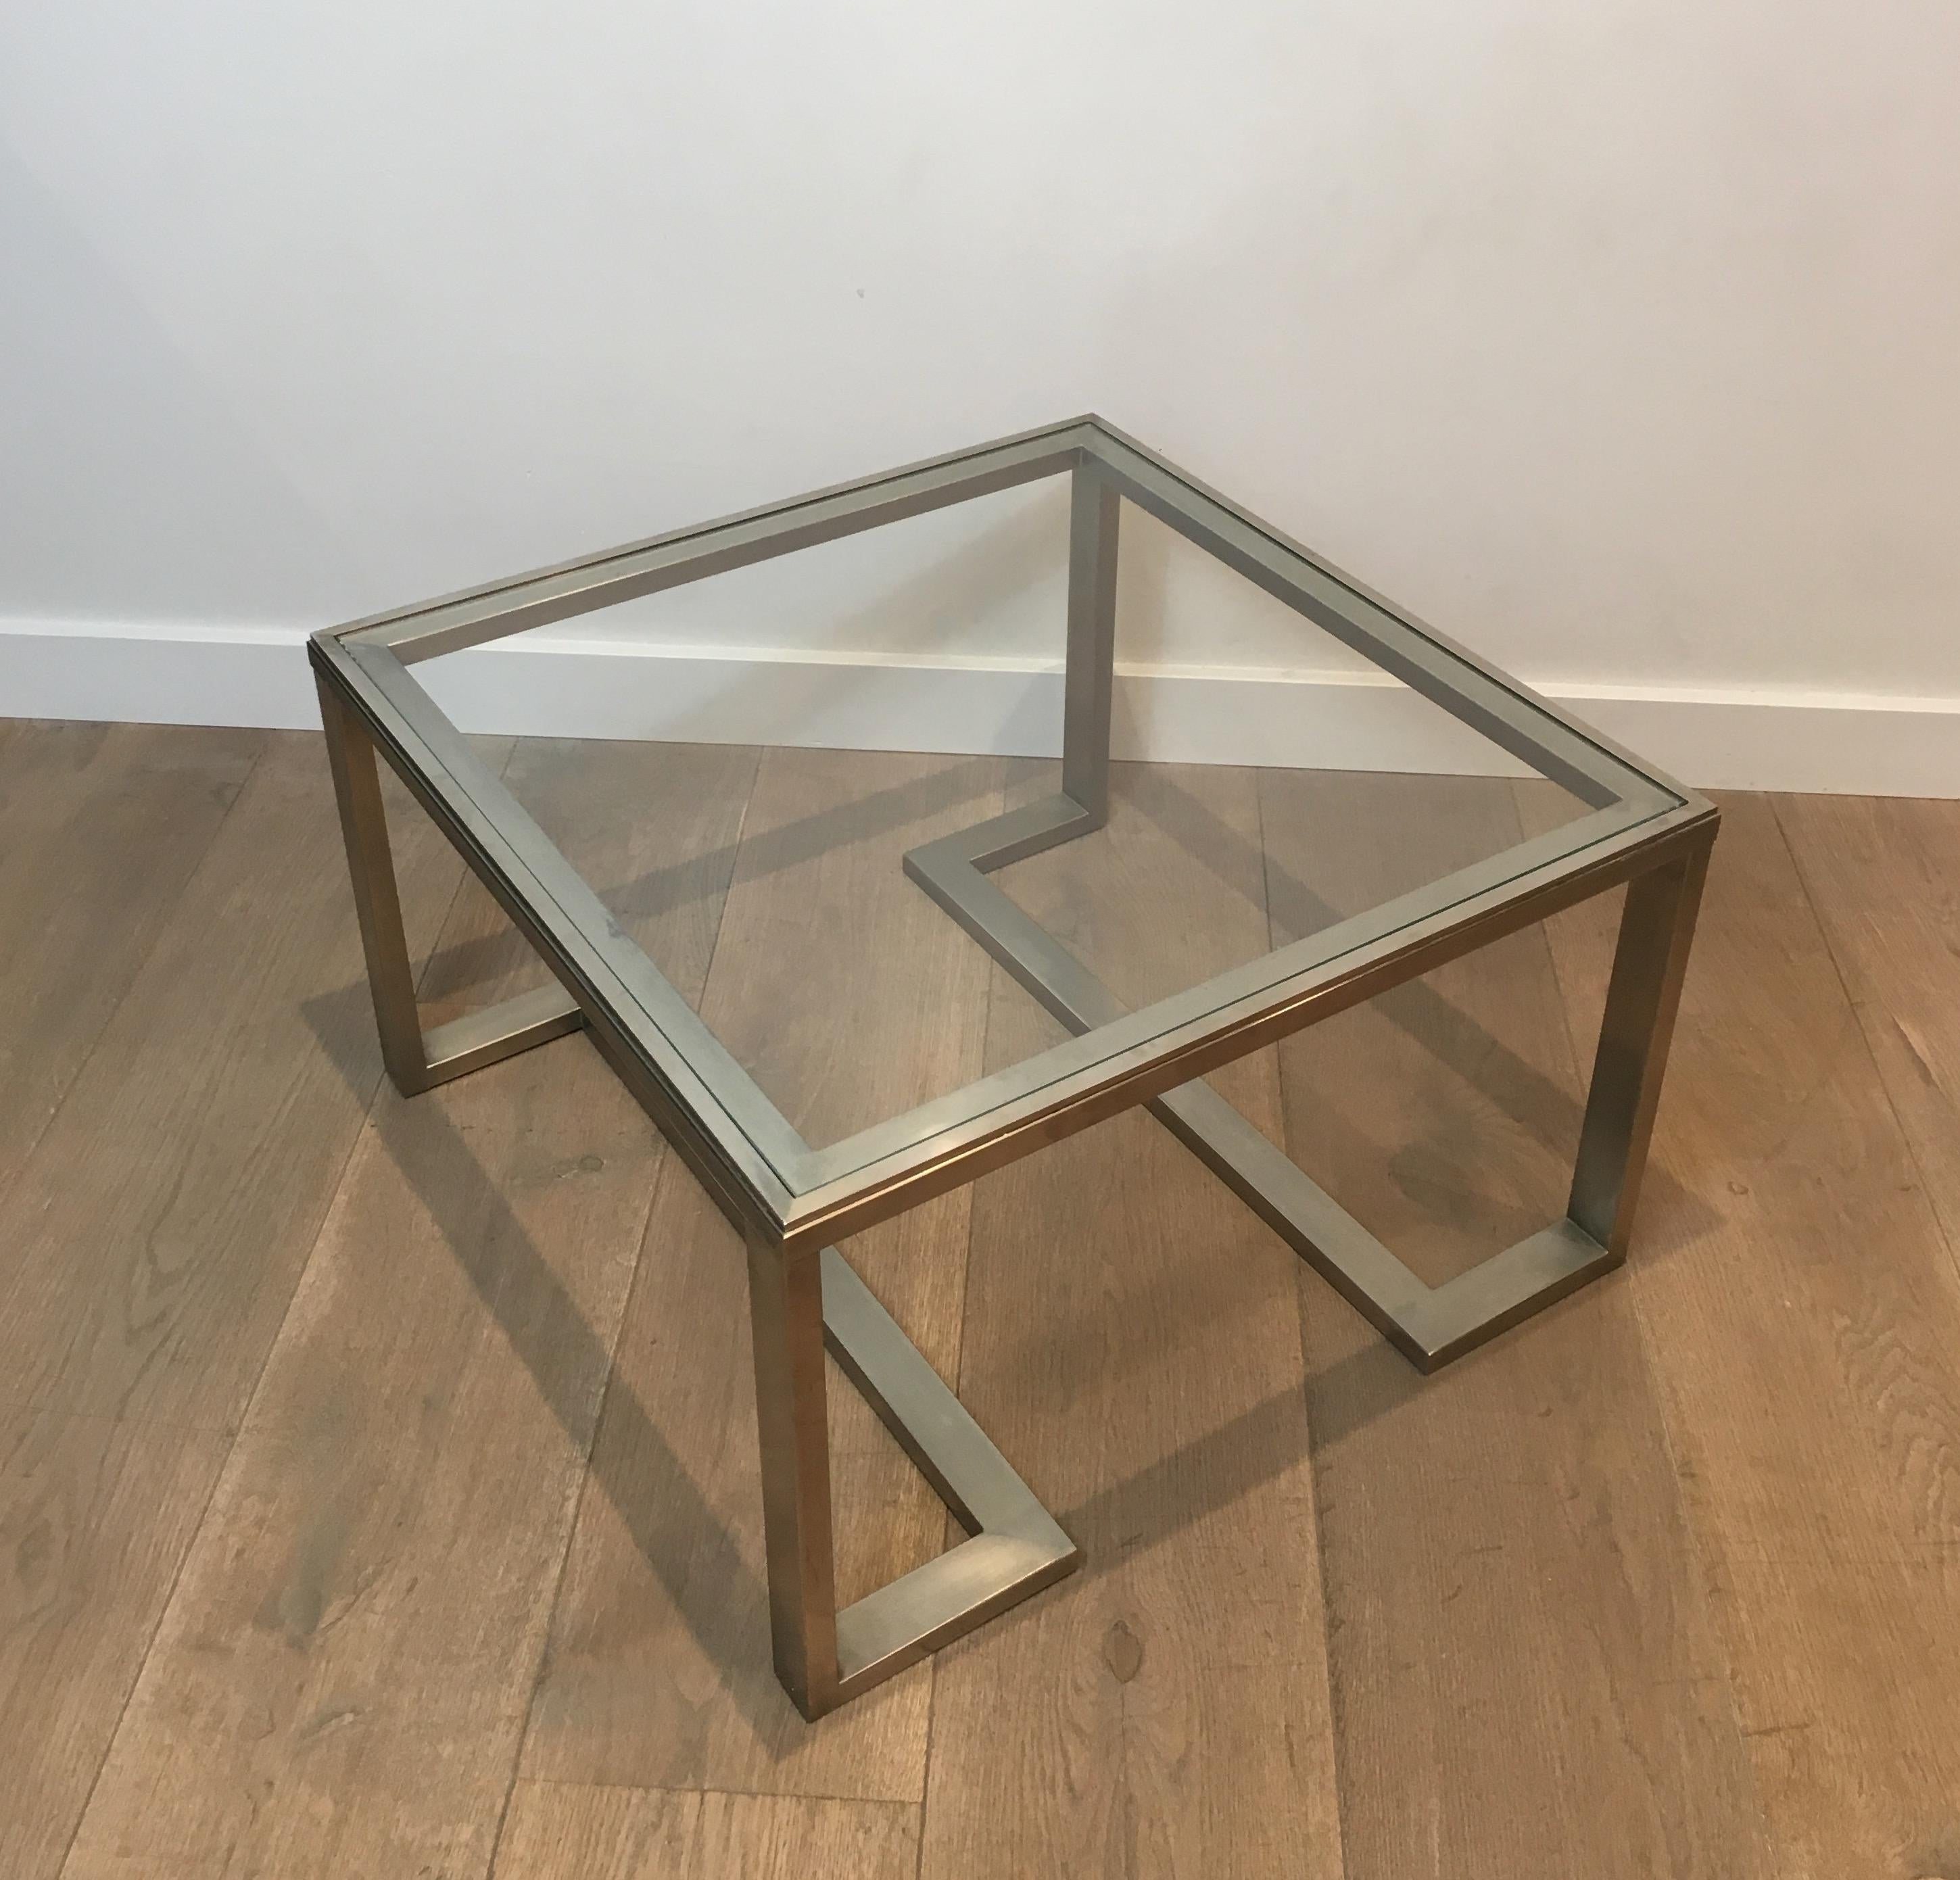 Pair of Design Brushed Steel Side Tables, French, circa 1970 For Sale 5